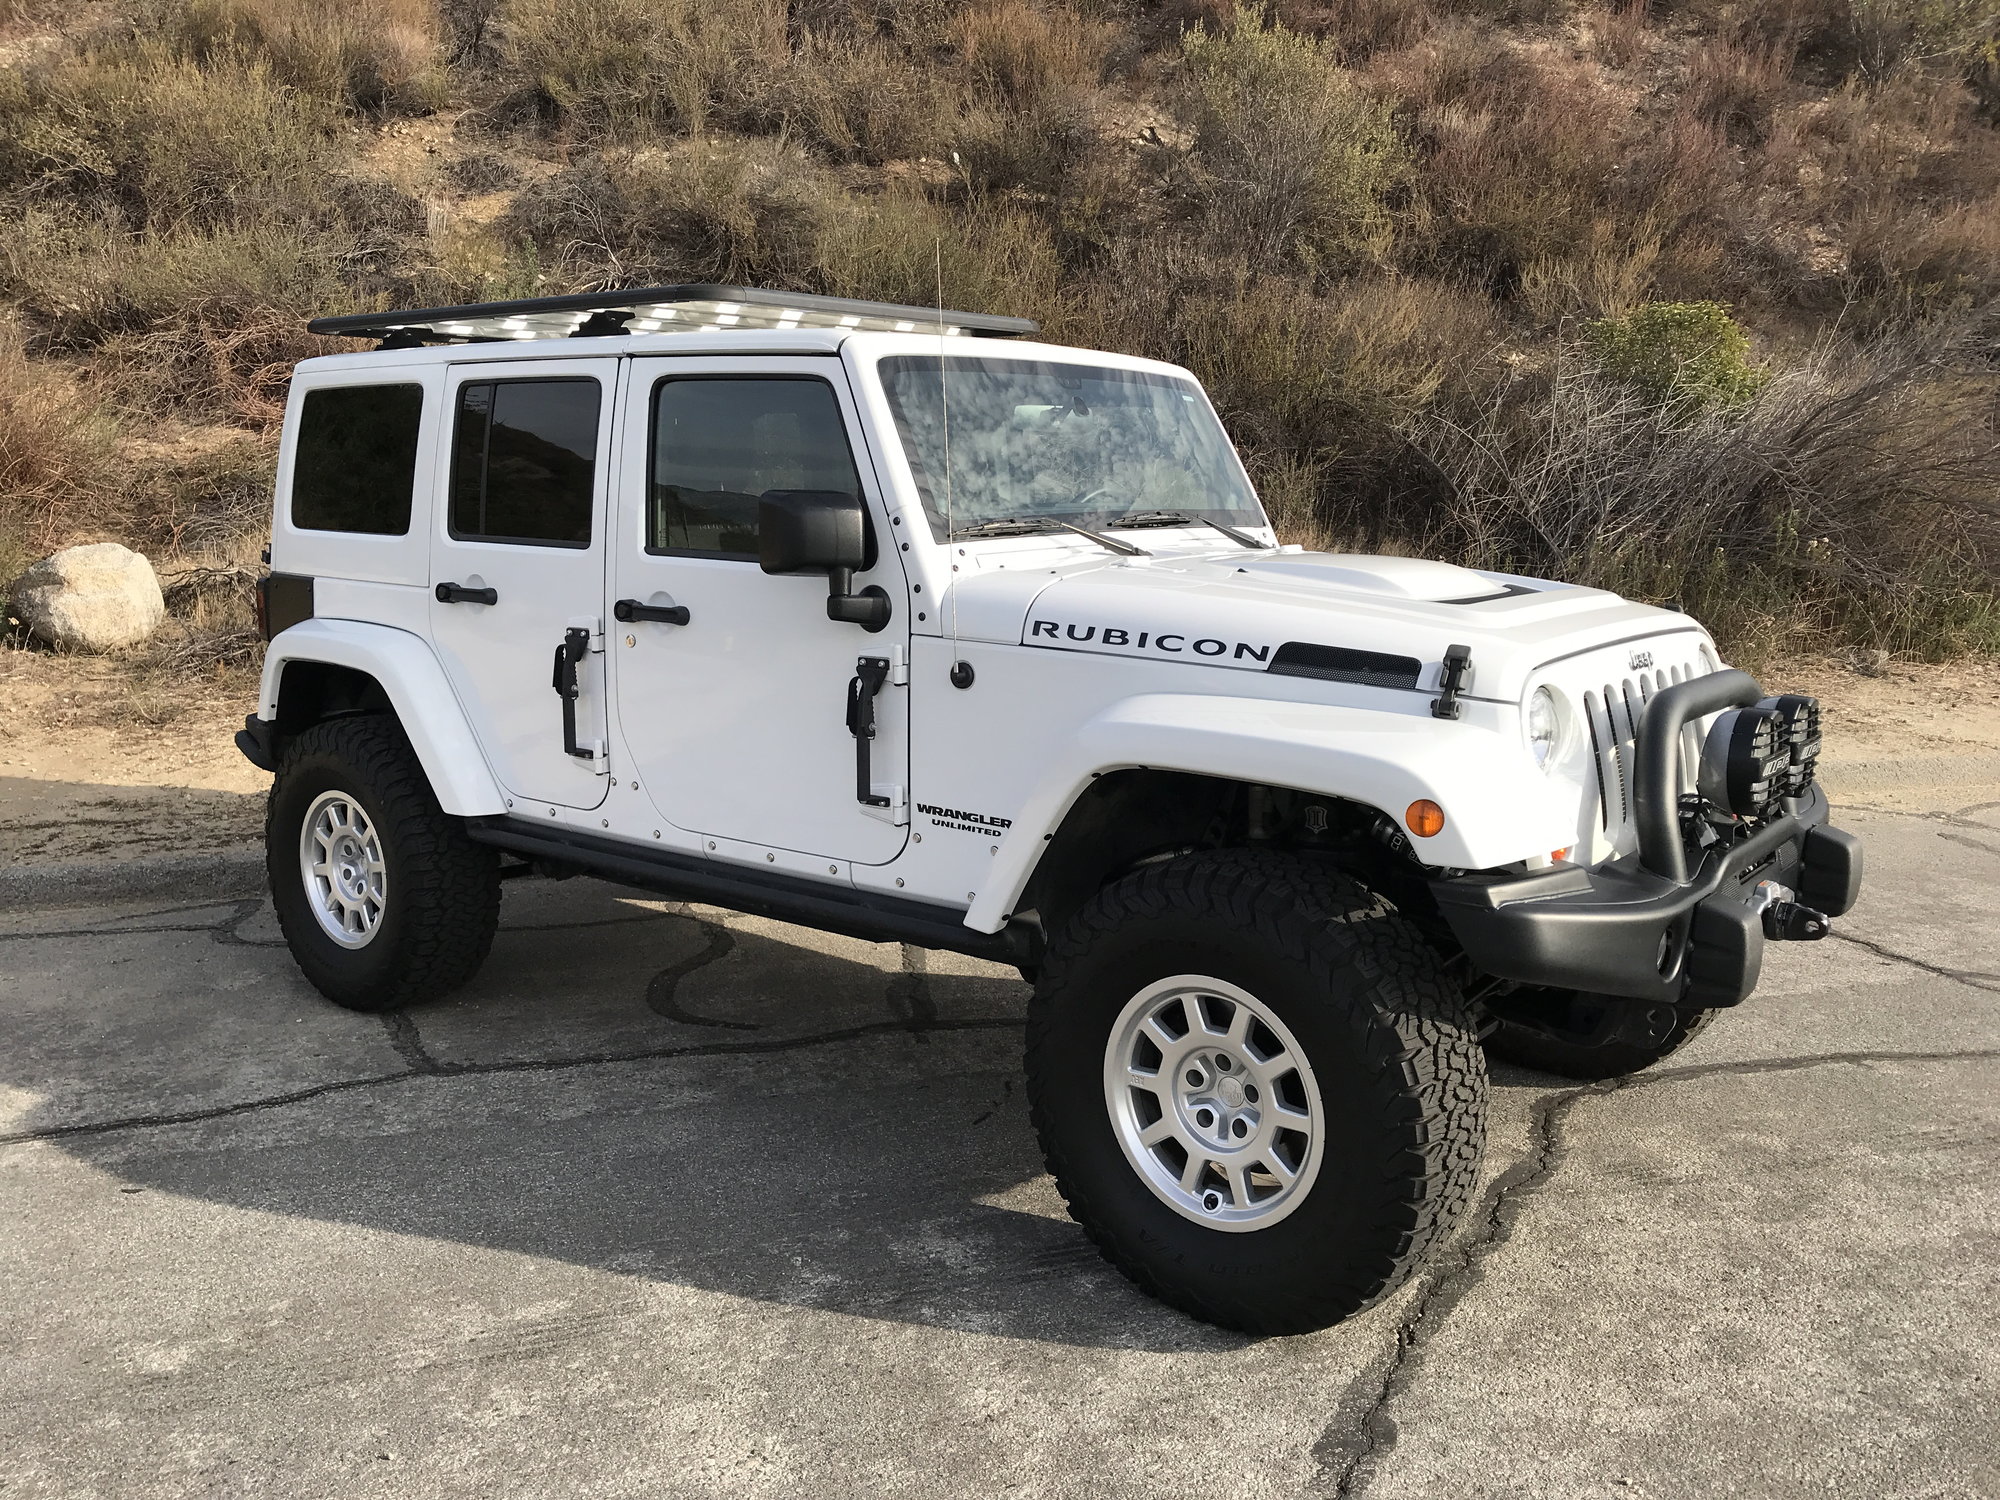 2013 Jeep Wrangler - '13 Jeep Wrangler JK Rubicon, 6-Speed, Supercharged, Lifted, 25k mi, SoCal - Used - VIN 1C4BJWFG6DL632664 - 25,000 Miles - 6 cyl - 4WD - Manual - SUV - White - Glendale, CA 91207, United States